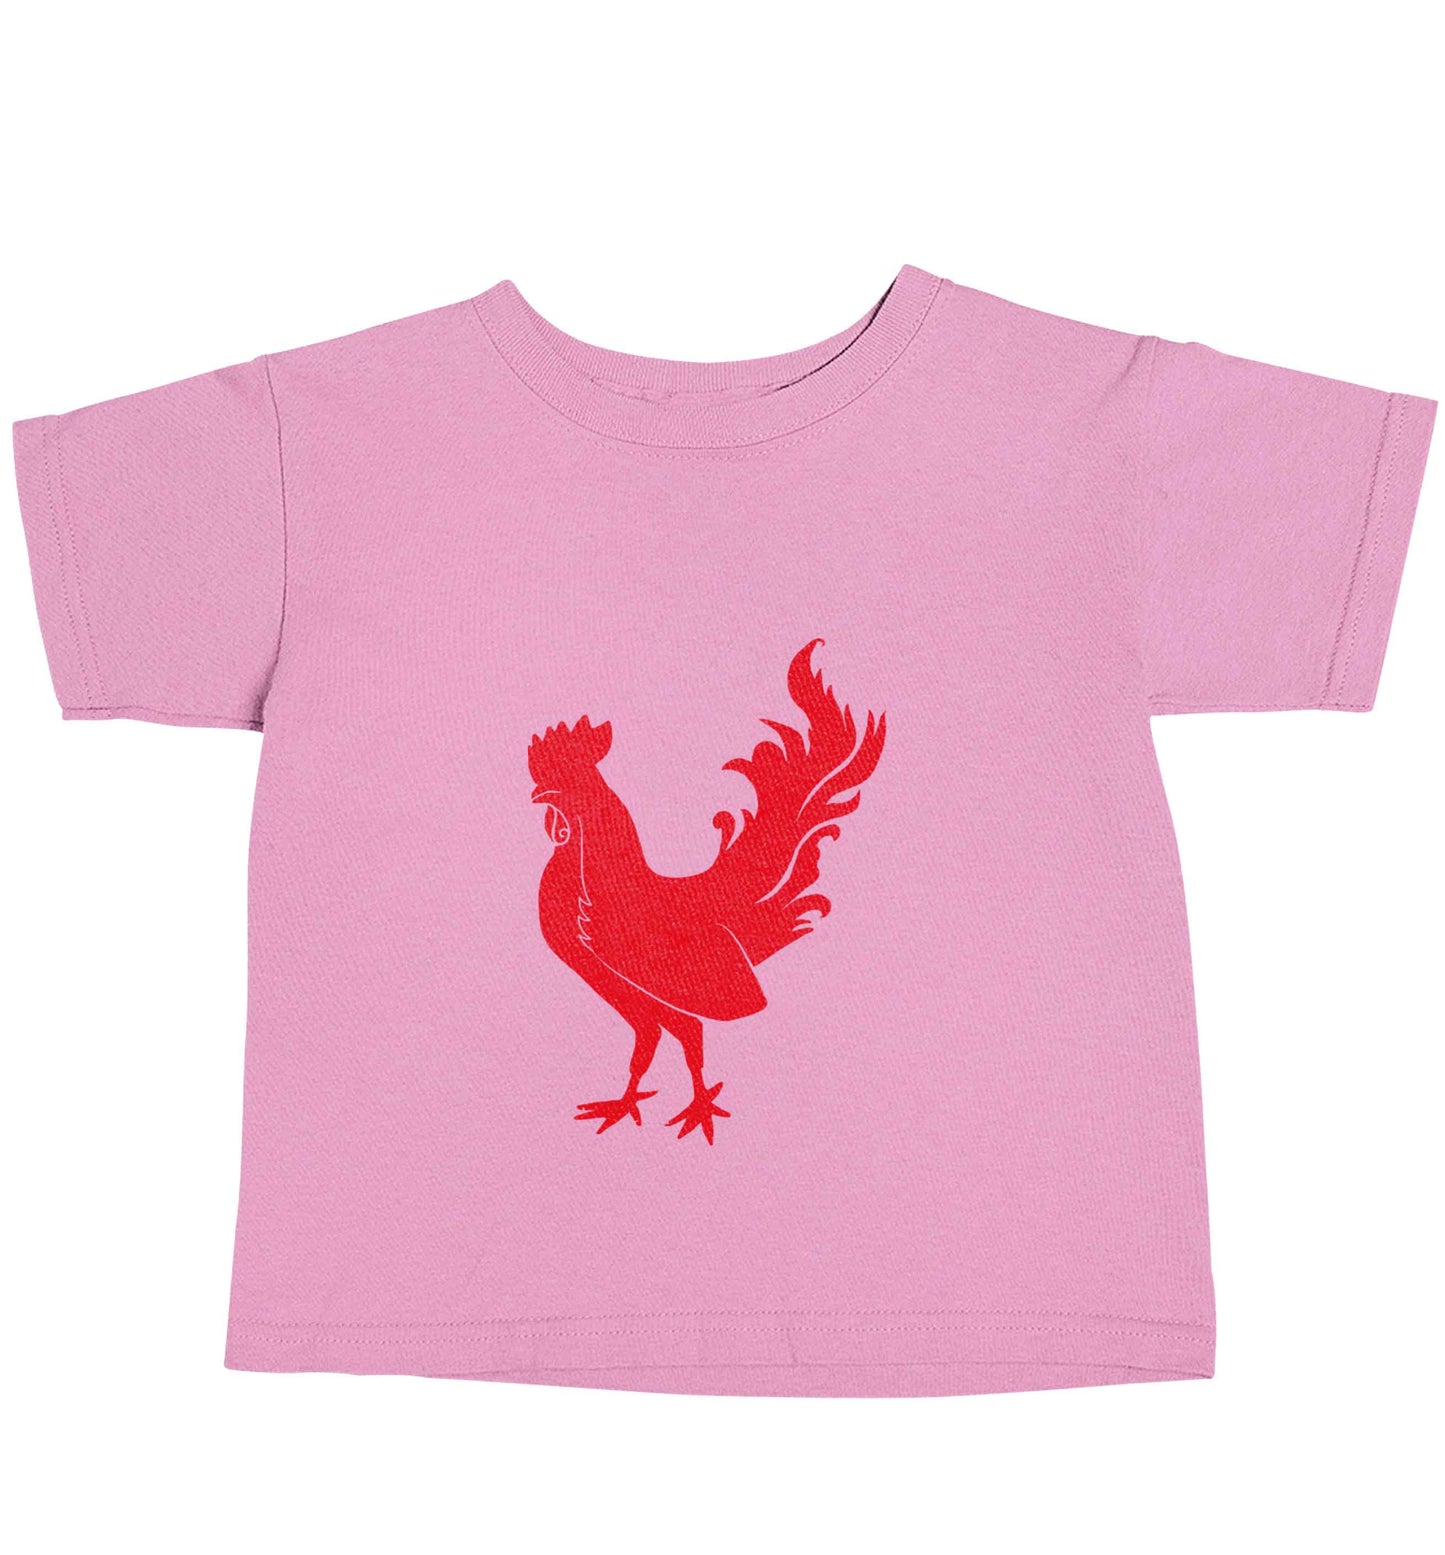 Rooster light pink baby toddler Tshirt 2 Years